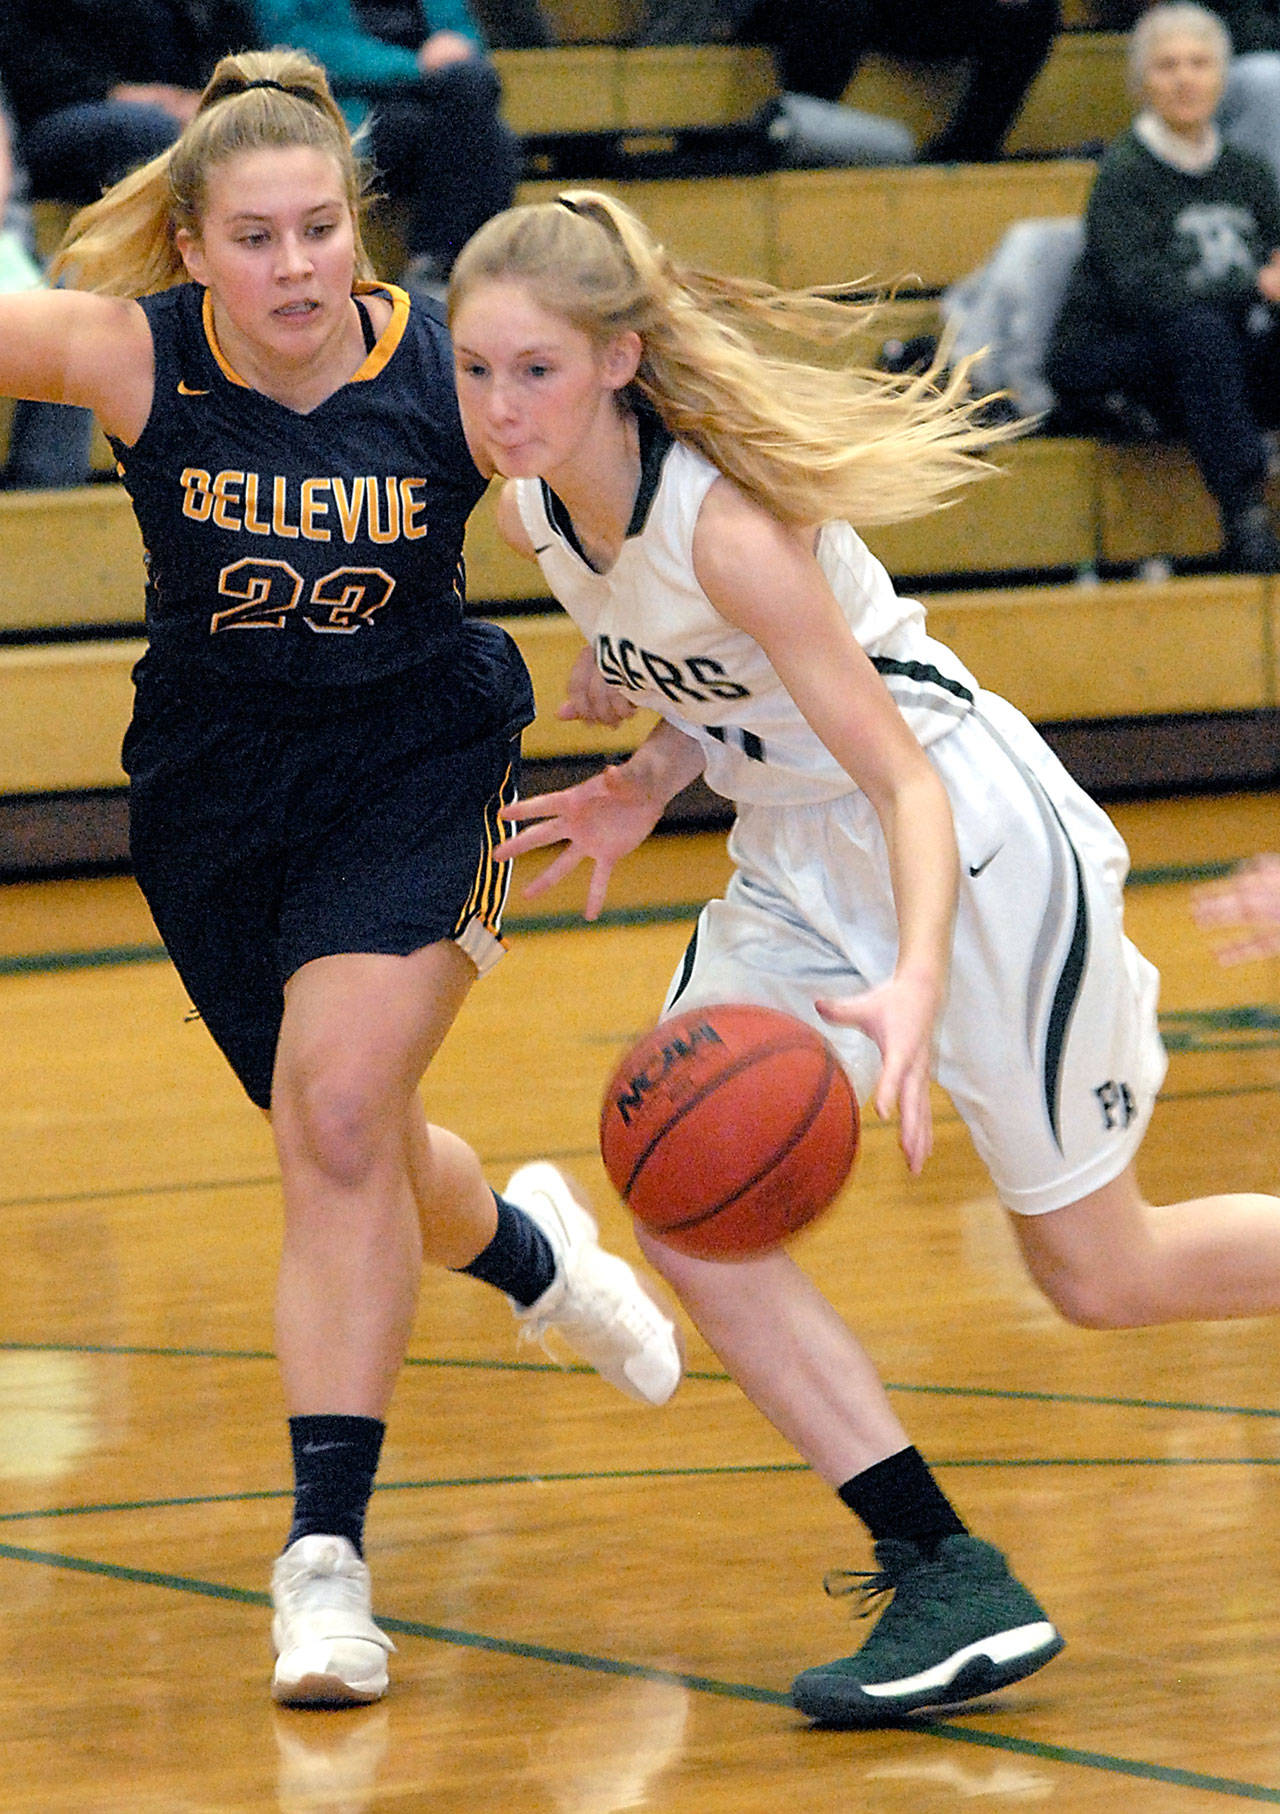 Keith Thorpe/Peninsula Daily News Port Angeles’ Millie Long, right slips past the defense of Bellevue’s Sara Bower in the first quarter of their Friday afternoon matchup at Port Angeles High School.